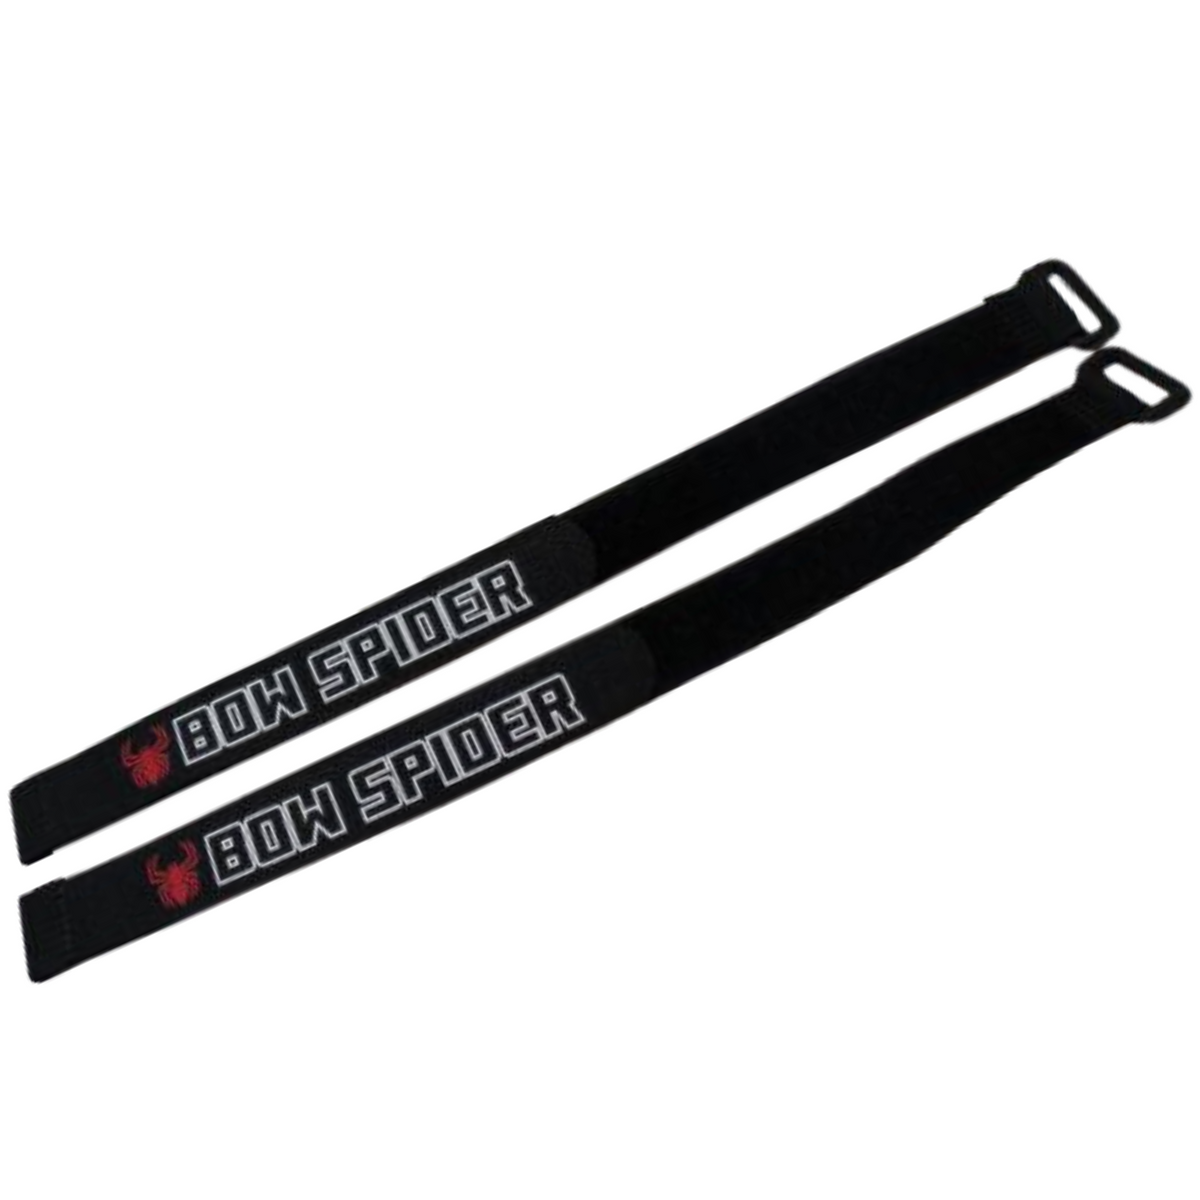 Bow Spider Straps (2 pack)